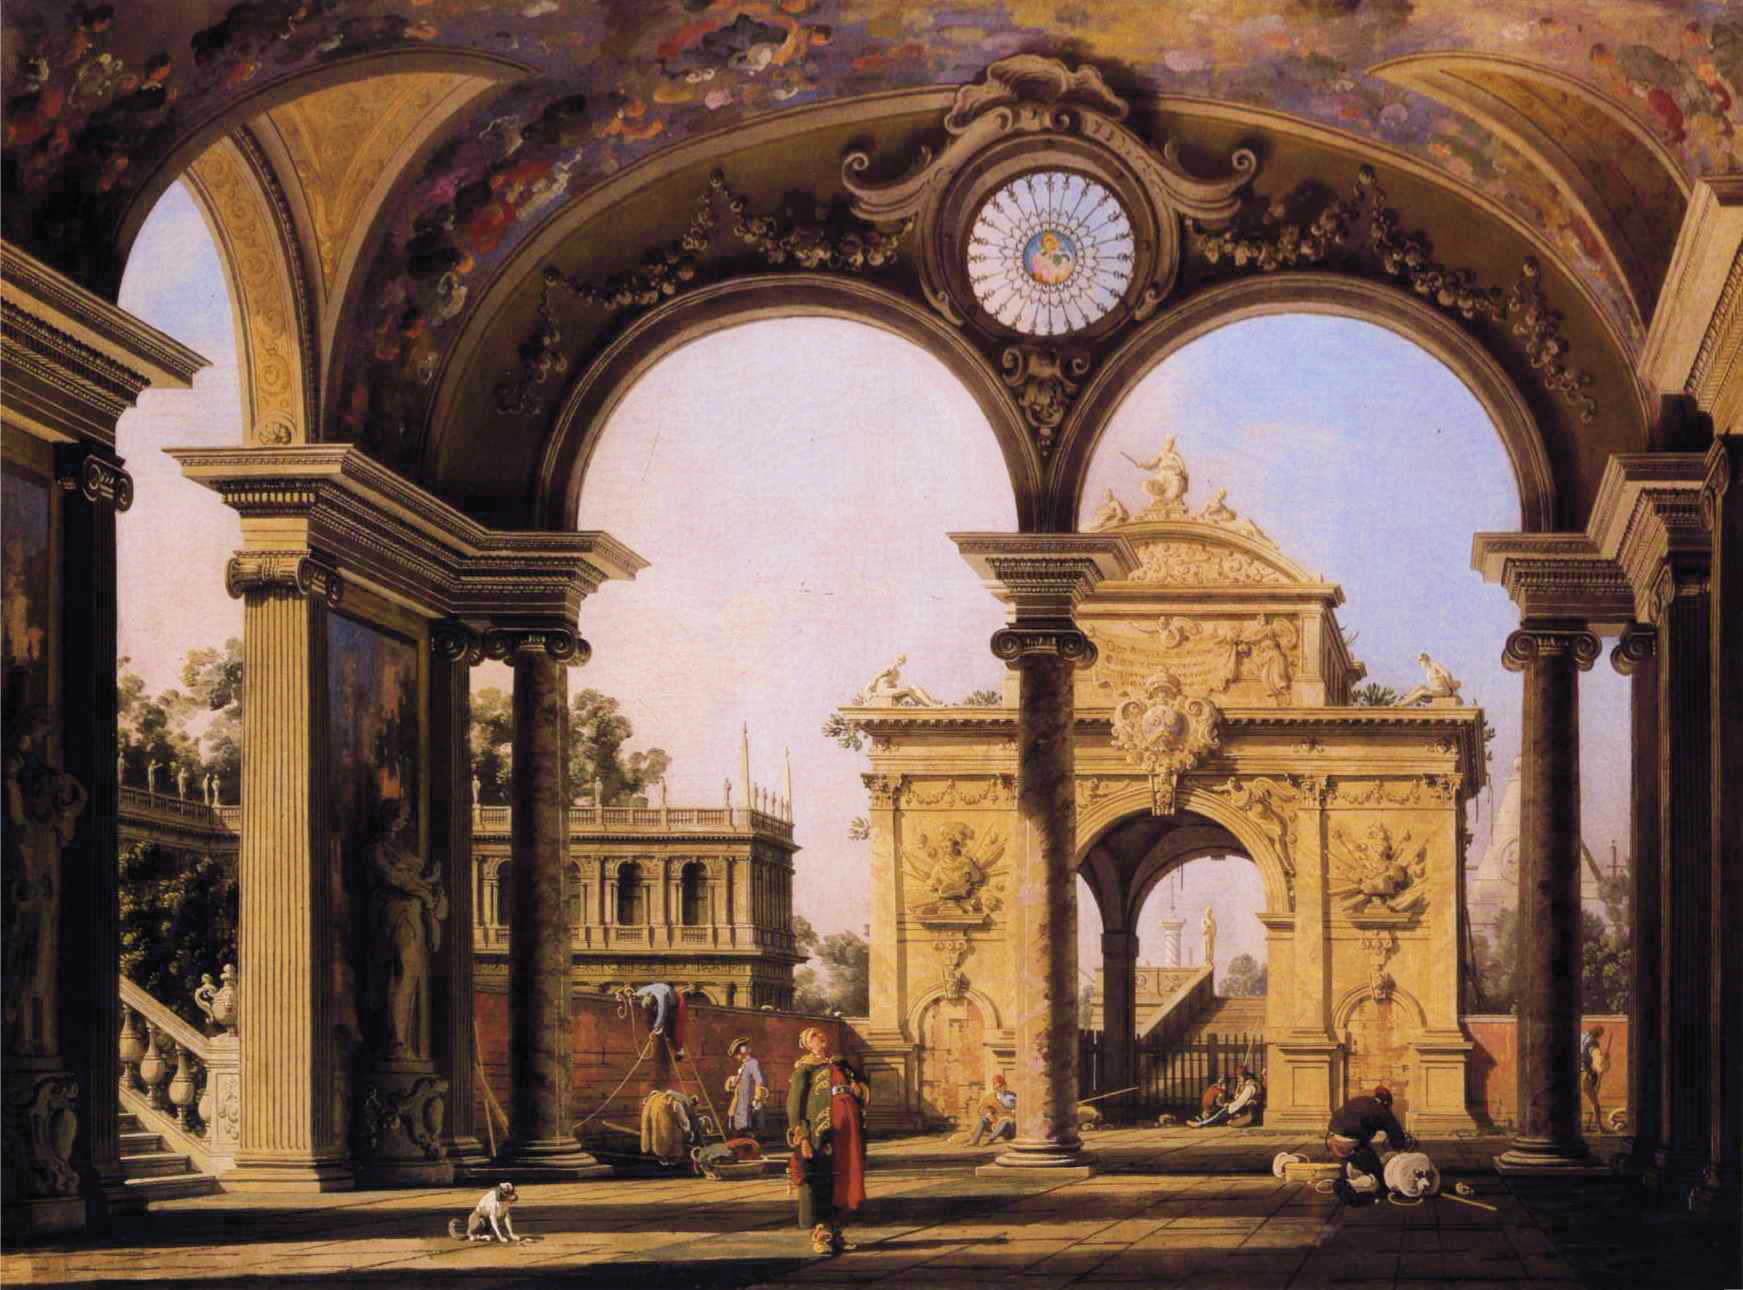 http://upload.wikimedia.org/wikipedia/commons/9/99/Canaletto_-_Capriccio_of_a_Renaisance_Triumphal_Arch_seen_from_the_Portico_of_a_Palace.JPG